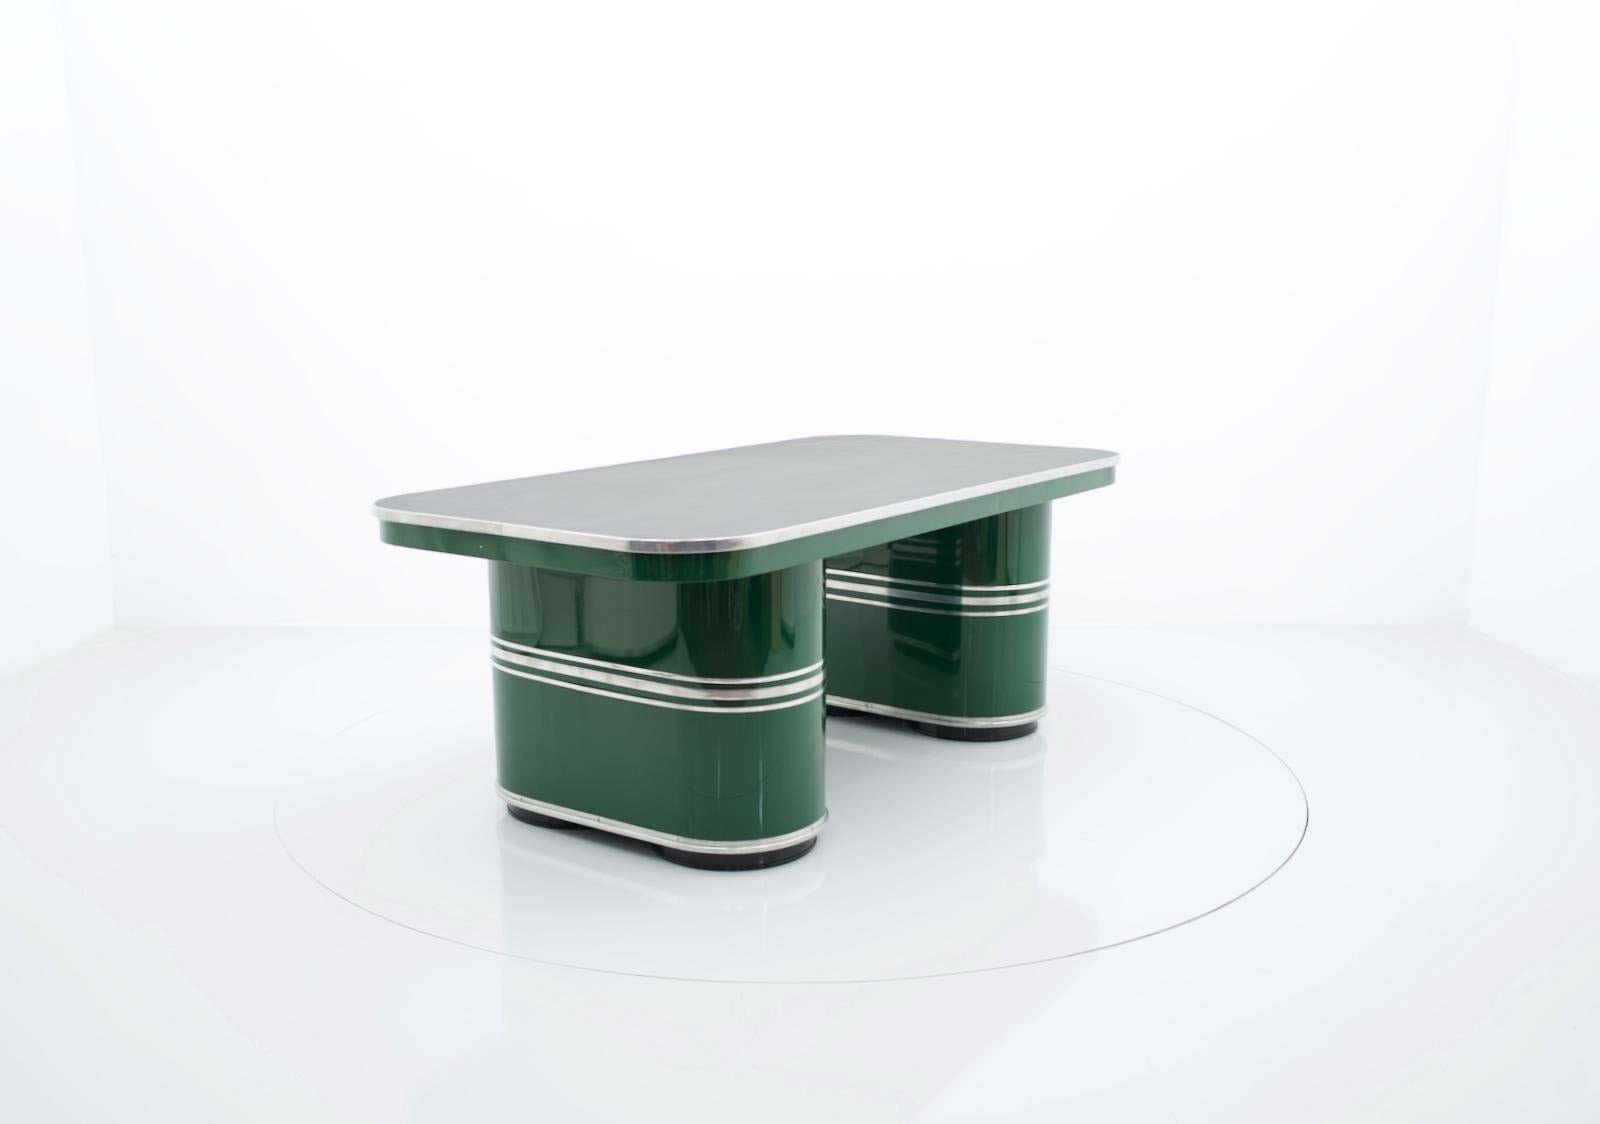 Mauser Rundform 'Berlin' Writing Desk in British Racing Green, Germany, 1950 For Sale 7